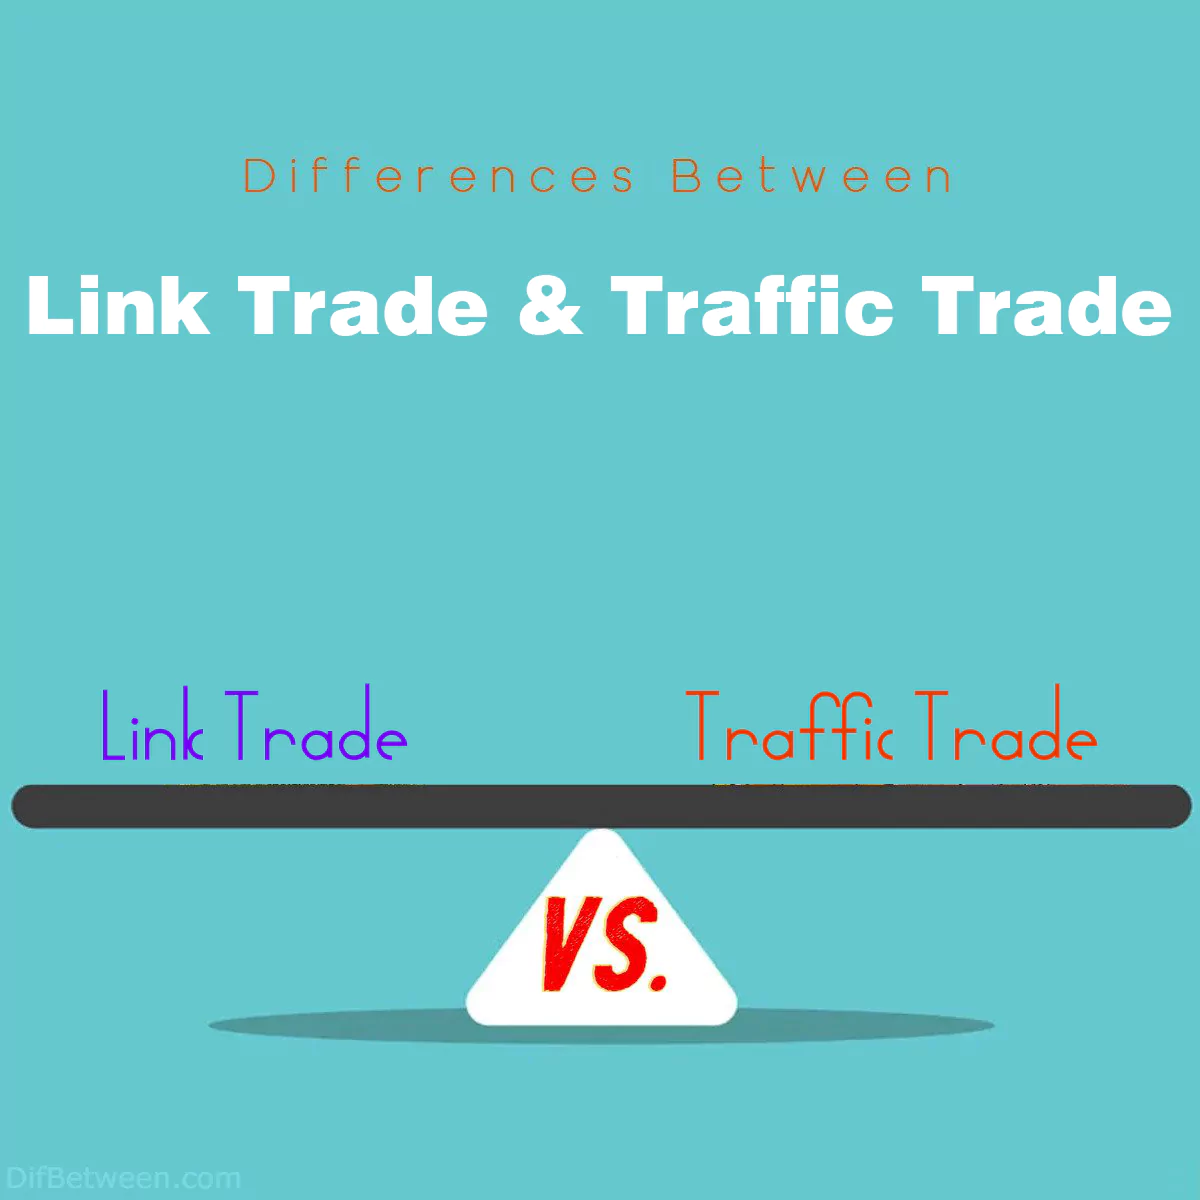 Differences Between Link Trade and Traffic Trade